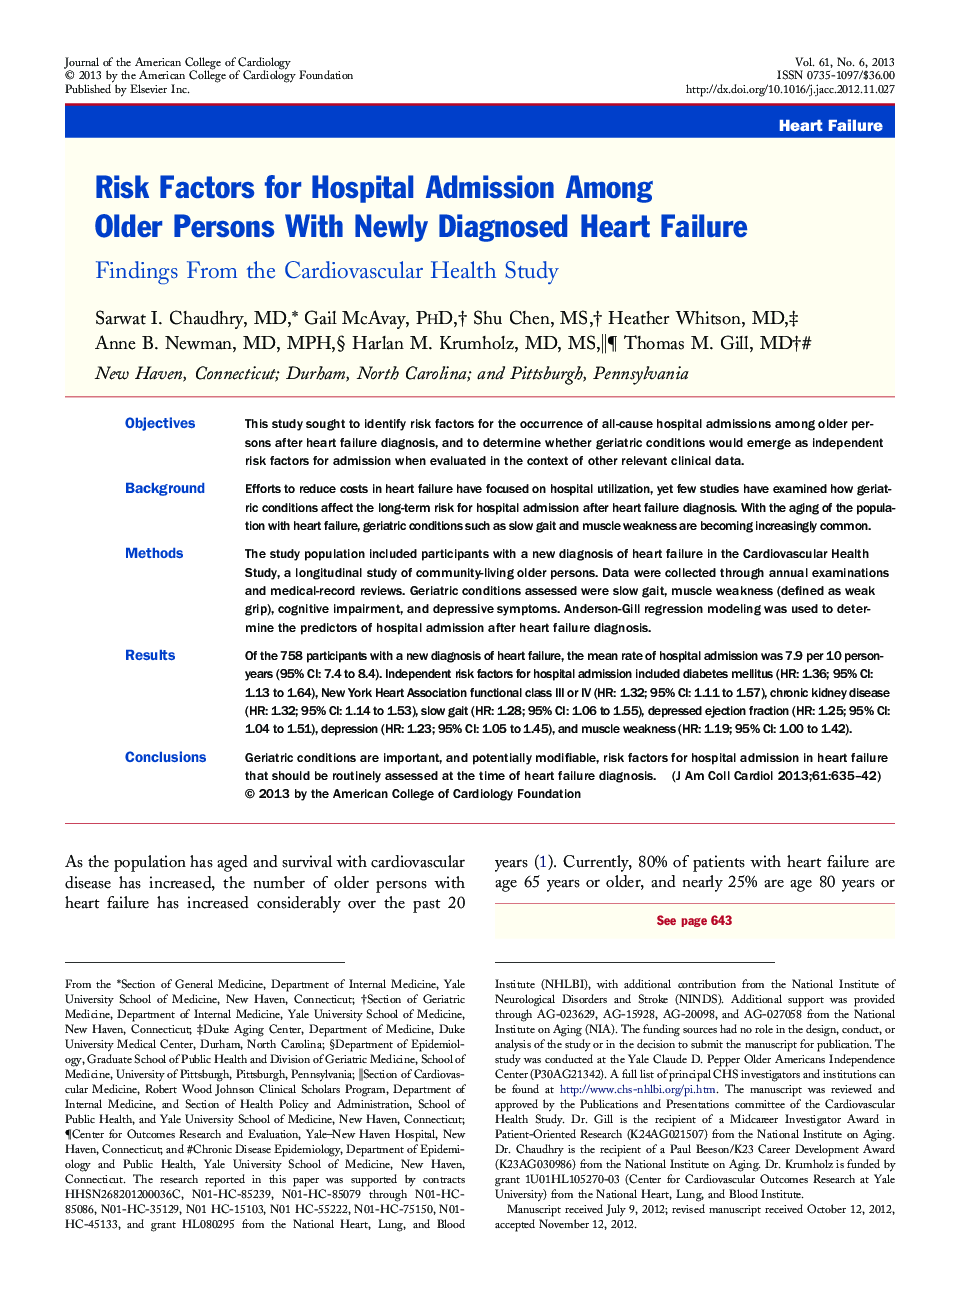 Risk Factors for Hospital Admission Among Older Persons With Newly Diagnosed Heart Failure : Findings From the Cardiovascular Health Study